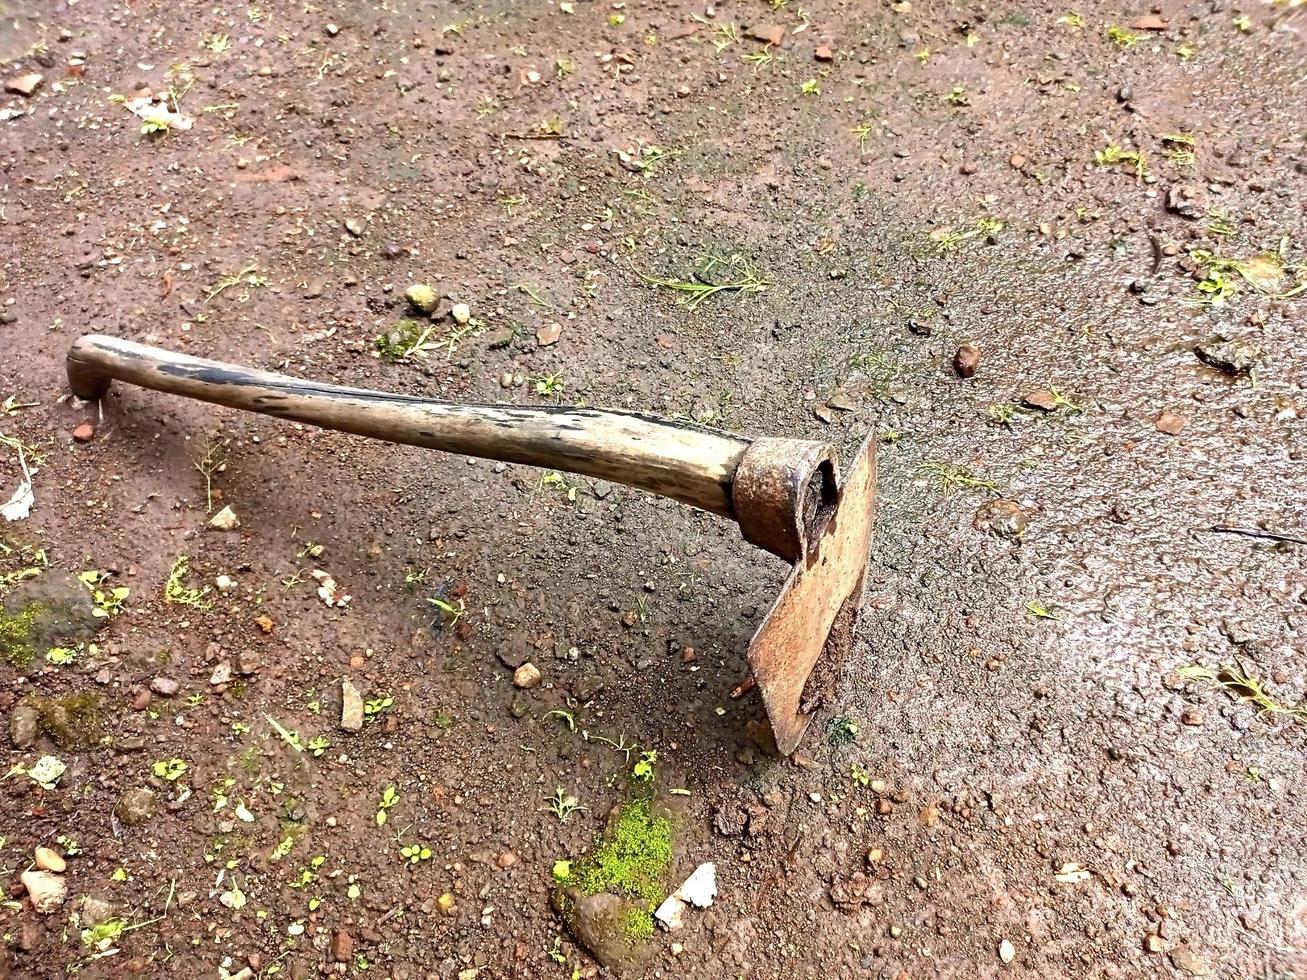 Farmer's old hoe lying on the ground photo